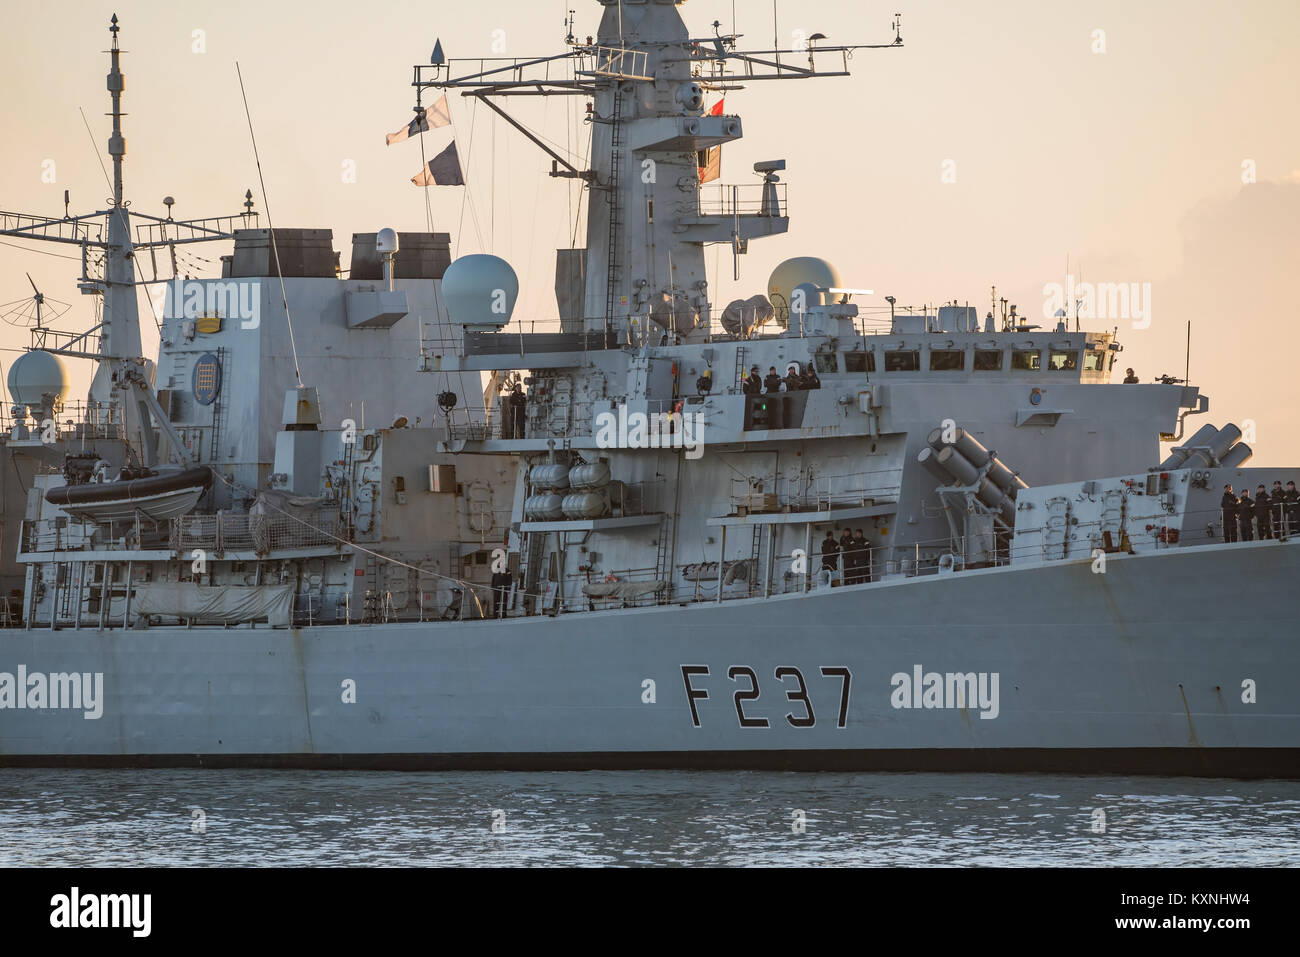 Portsmouth, UK. 10th January, 2018. The Royal Navy Type 23 Frigate, HMS Westminster, arrives home after monitoring Russian Navy vessels passing through the English Channel. As the Fleet Ready Escort, Westminster was tasked to intercept and escort the Russian ships at short notice. Credit: Neil Watkin / Alamy Live News Stock Photo